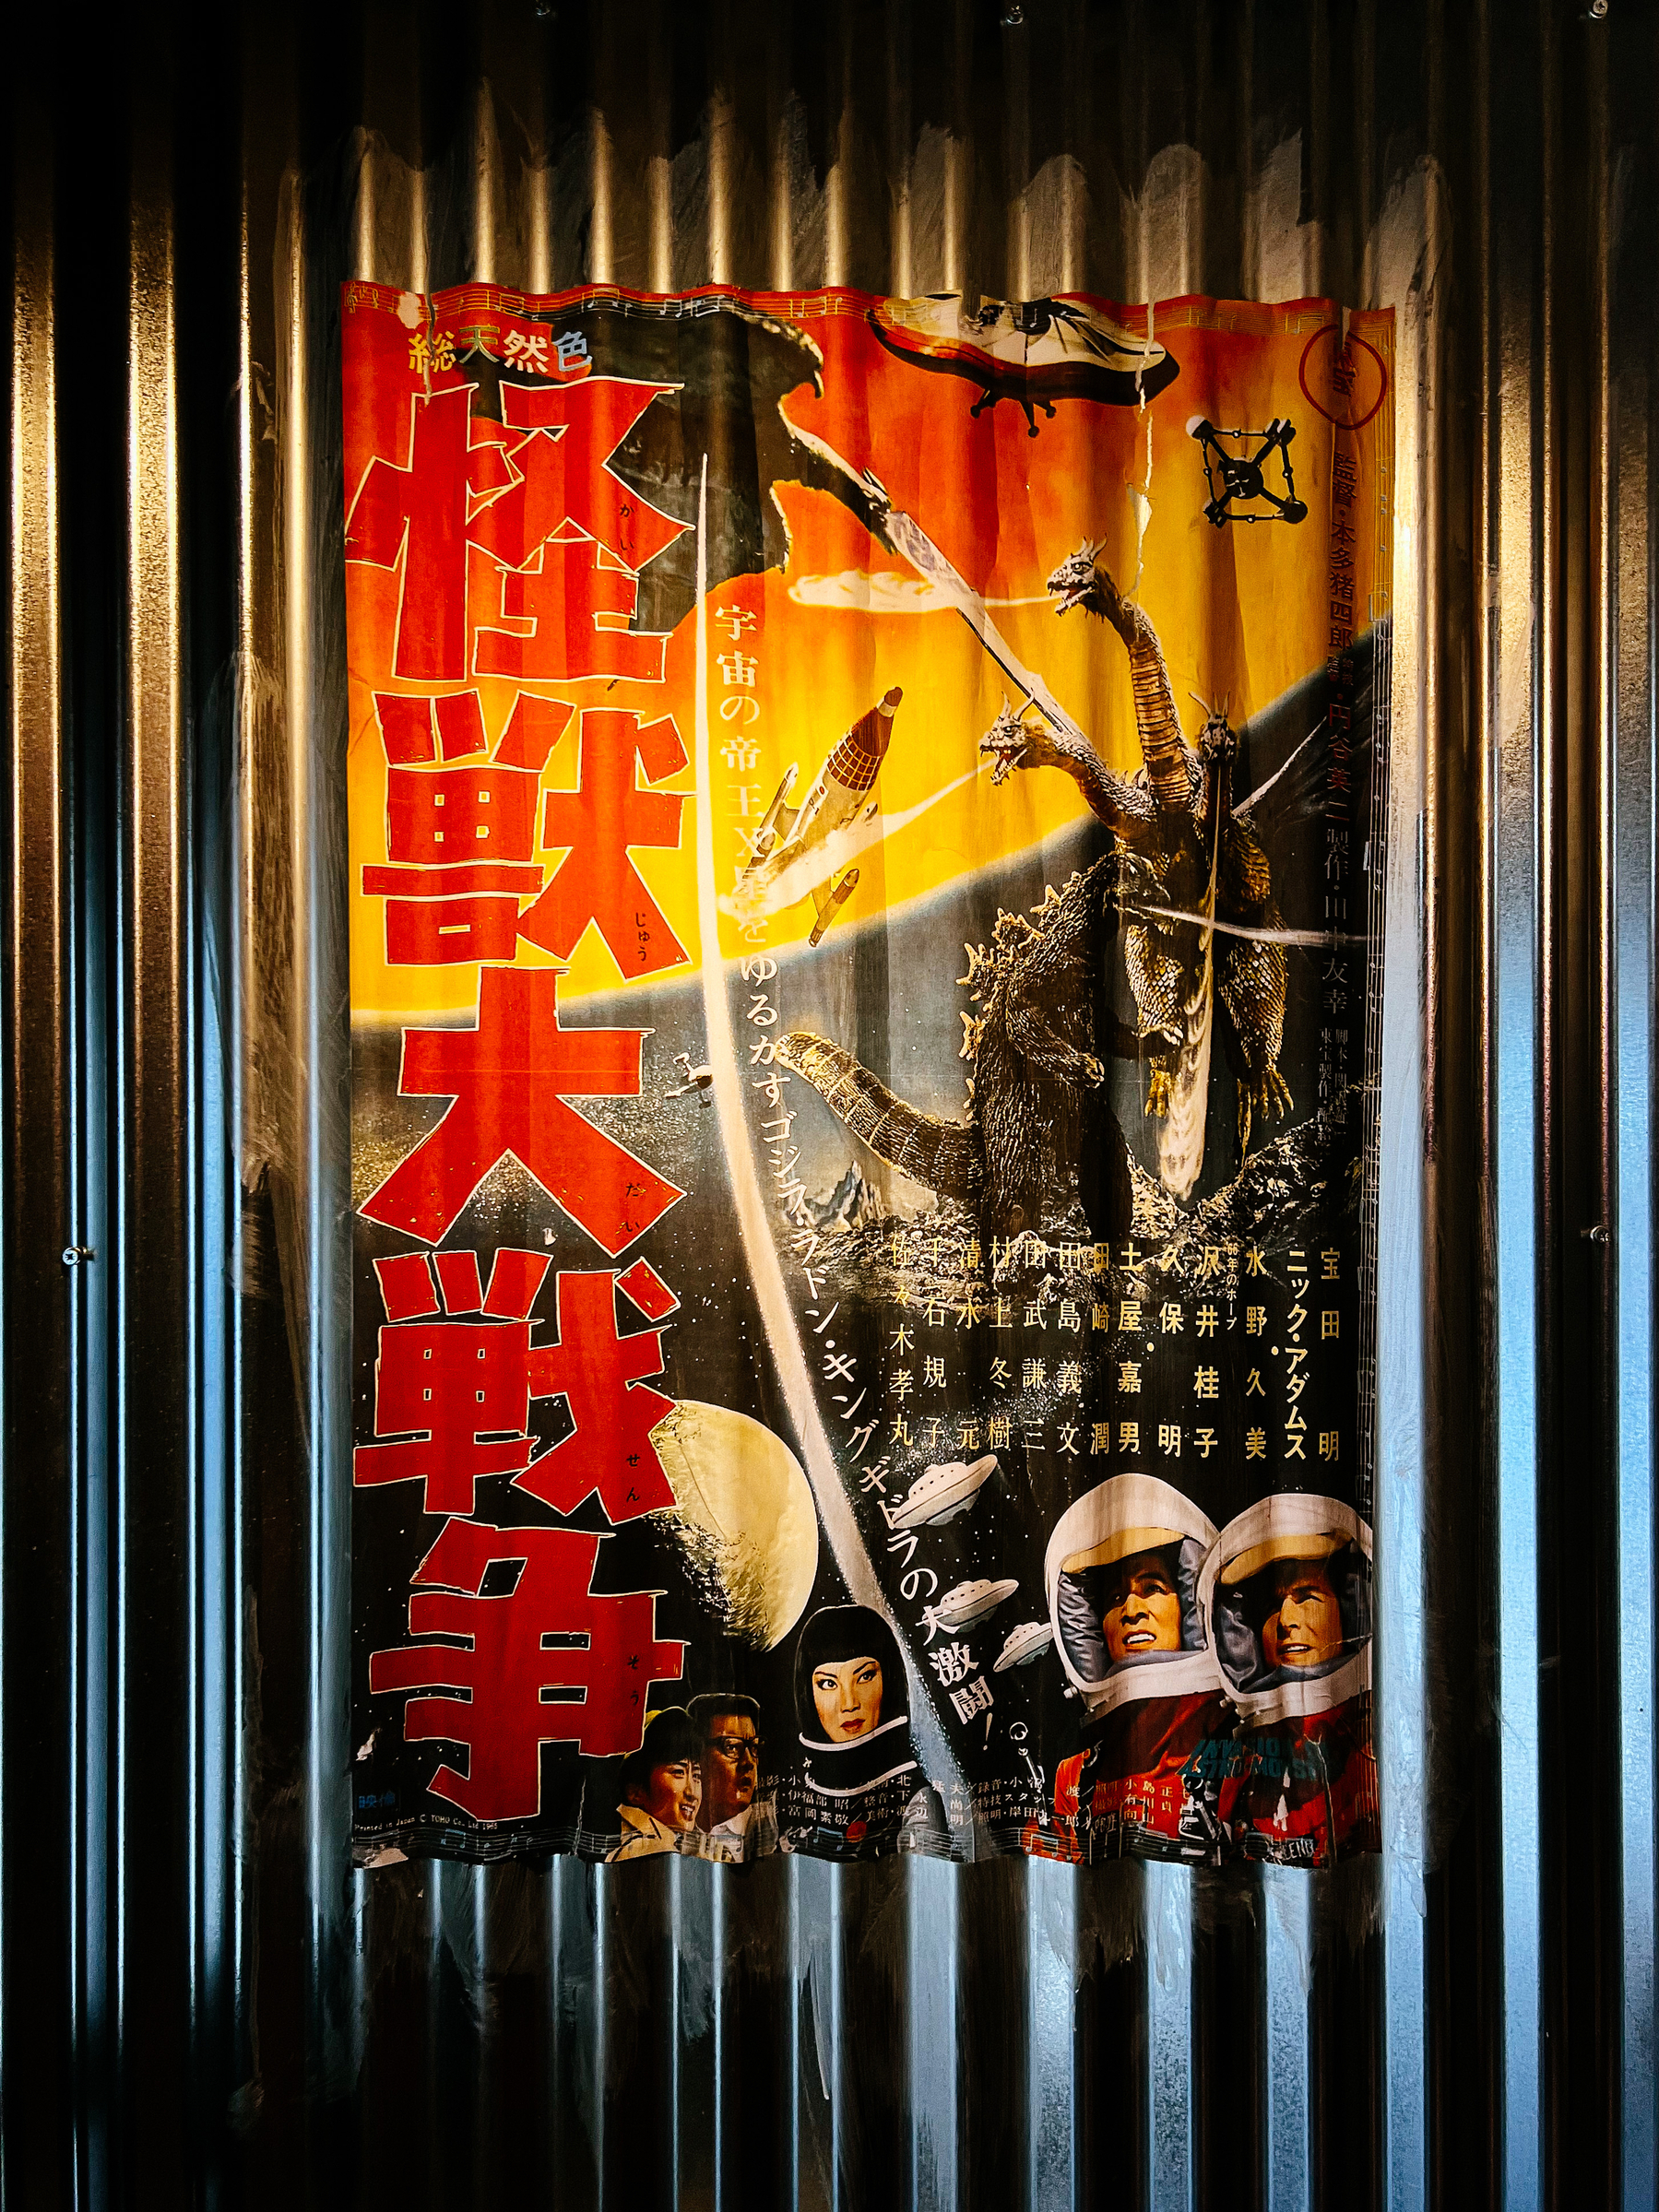 A metallic wall with a vintage Japanese movie poster 